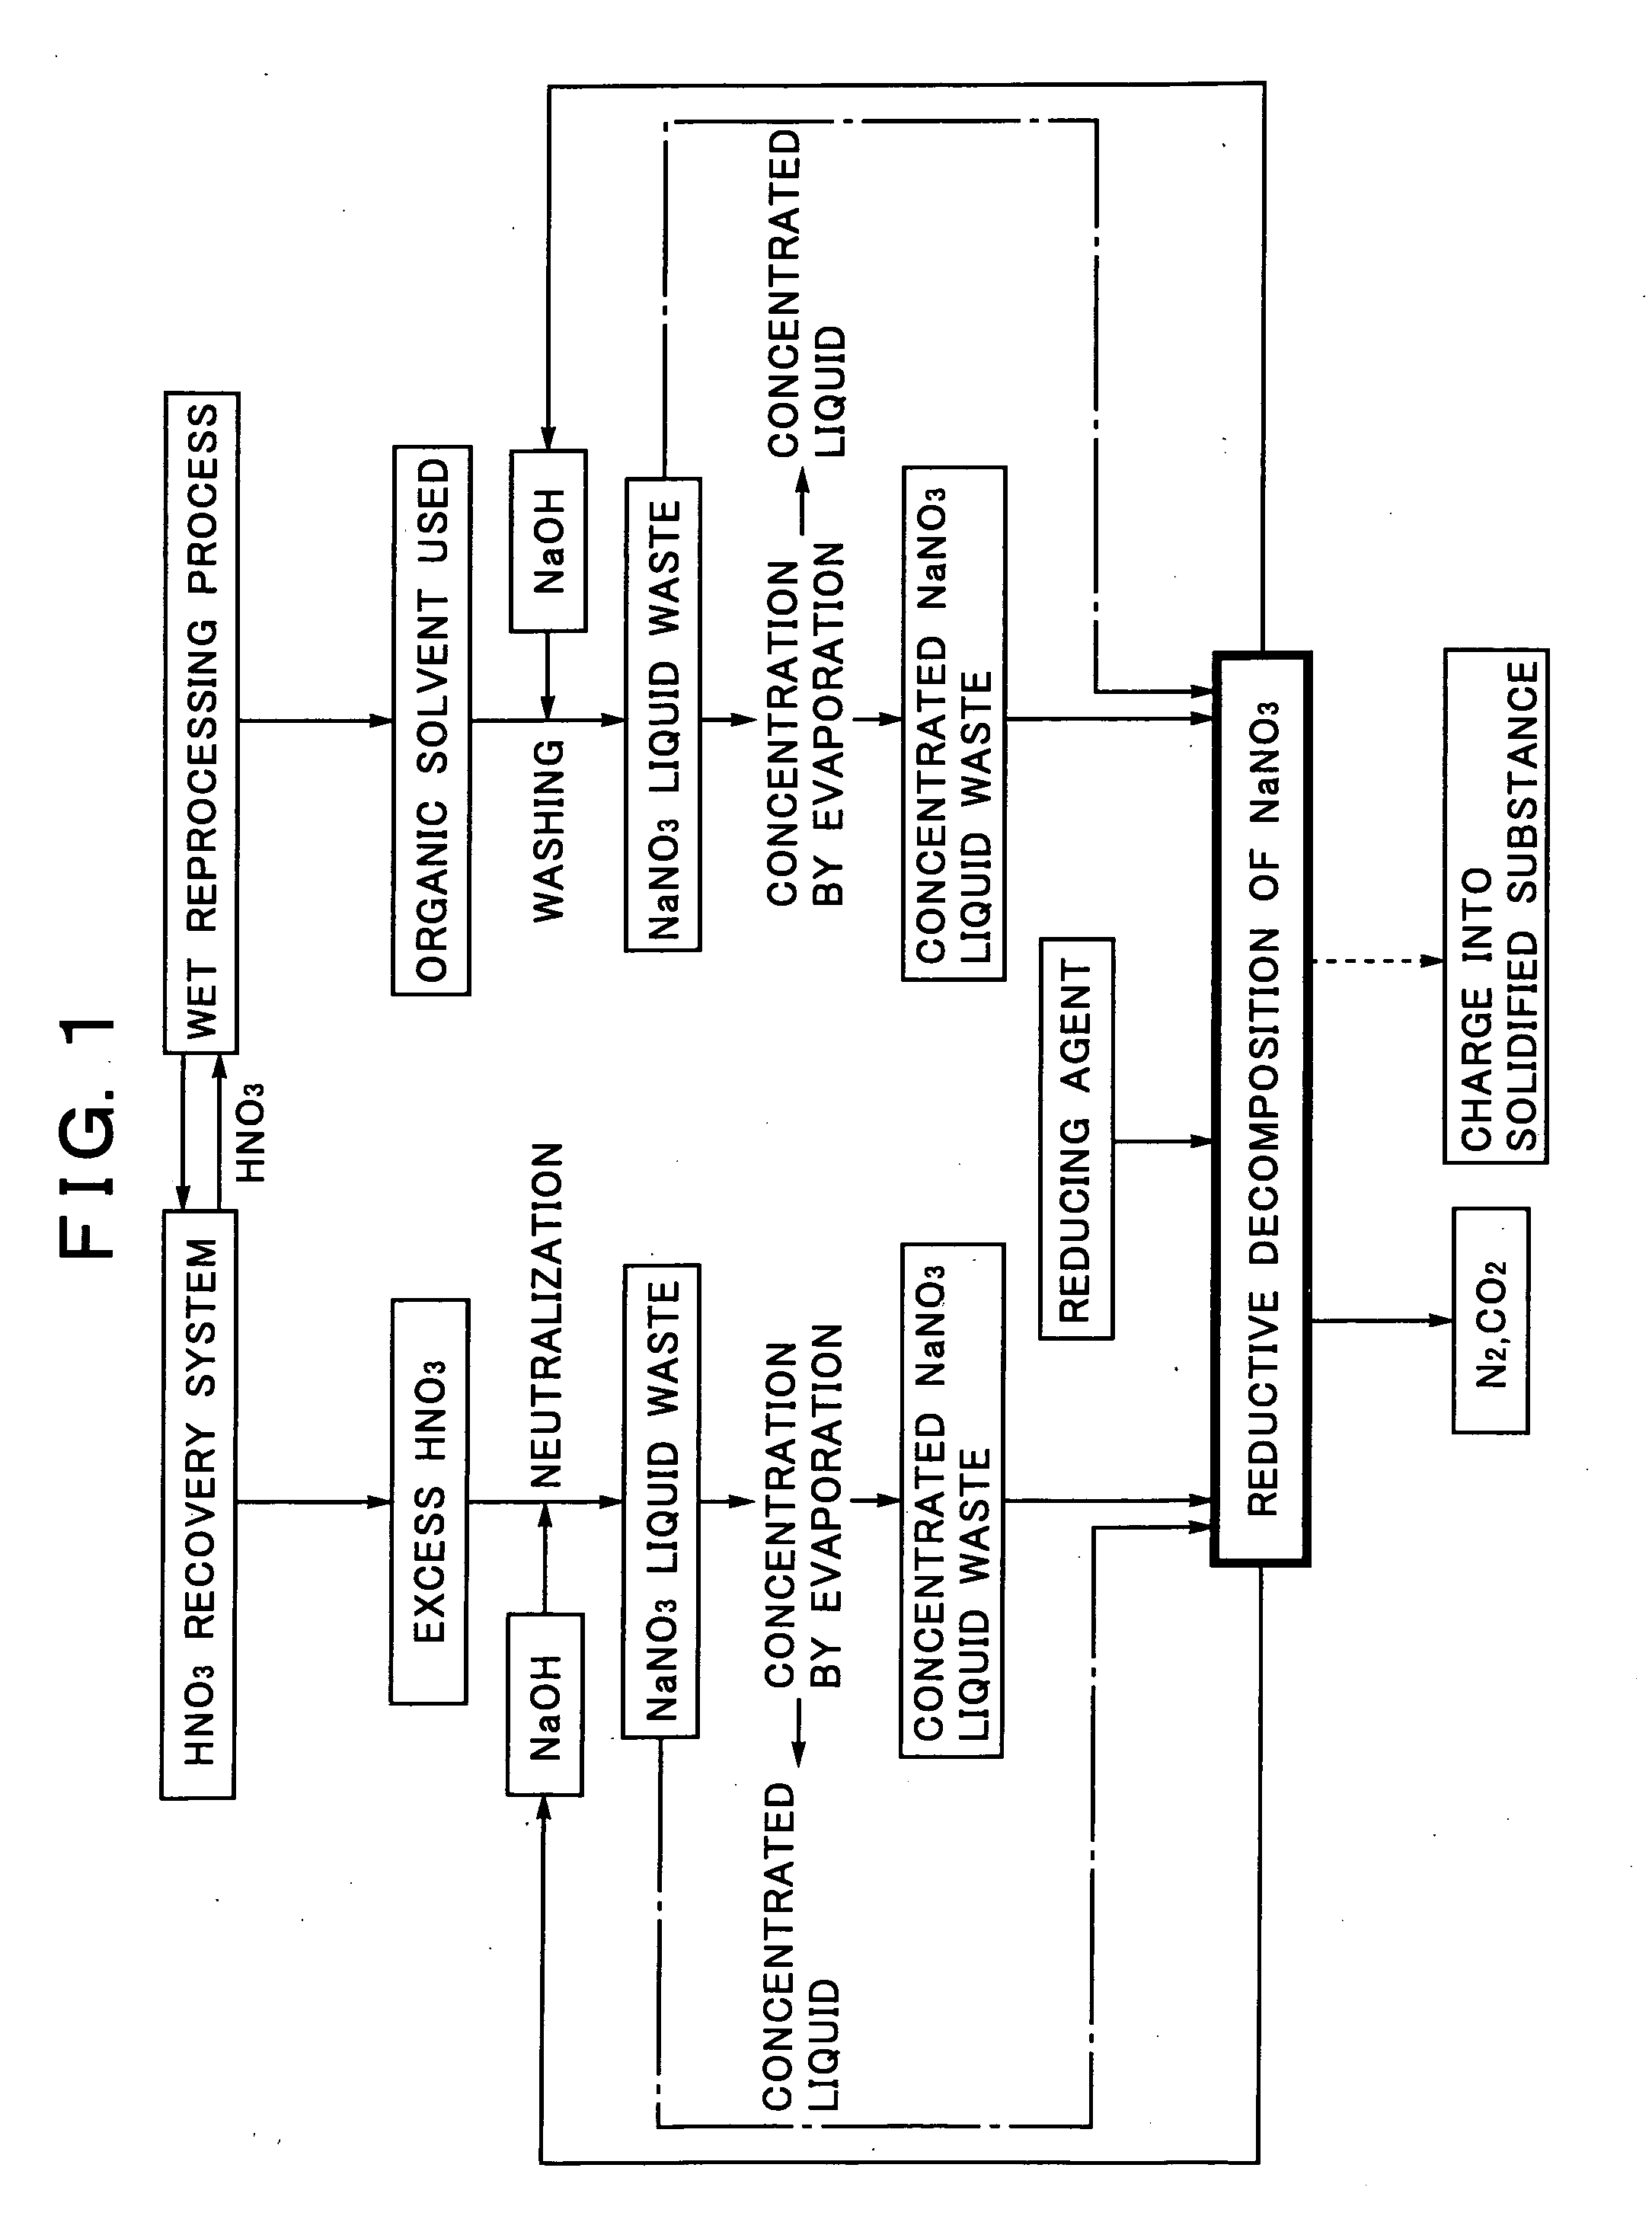 Sodium Salt Recycling Process for Use in Wet Reprocessing Process of Spent Nuclear Fuel